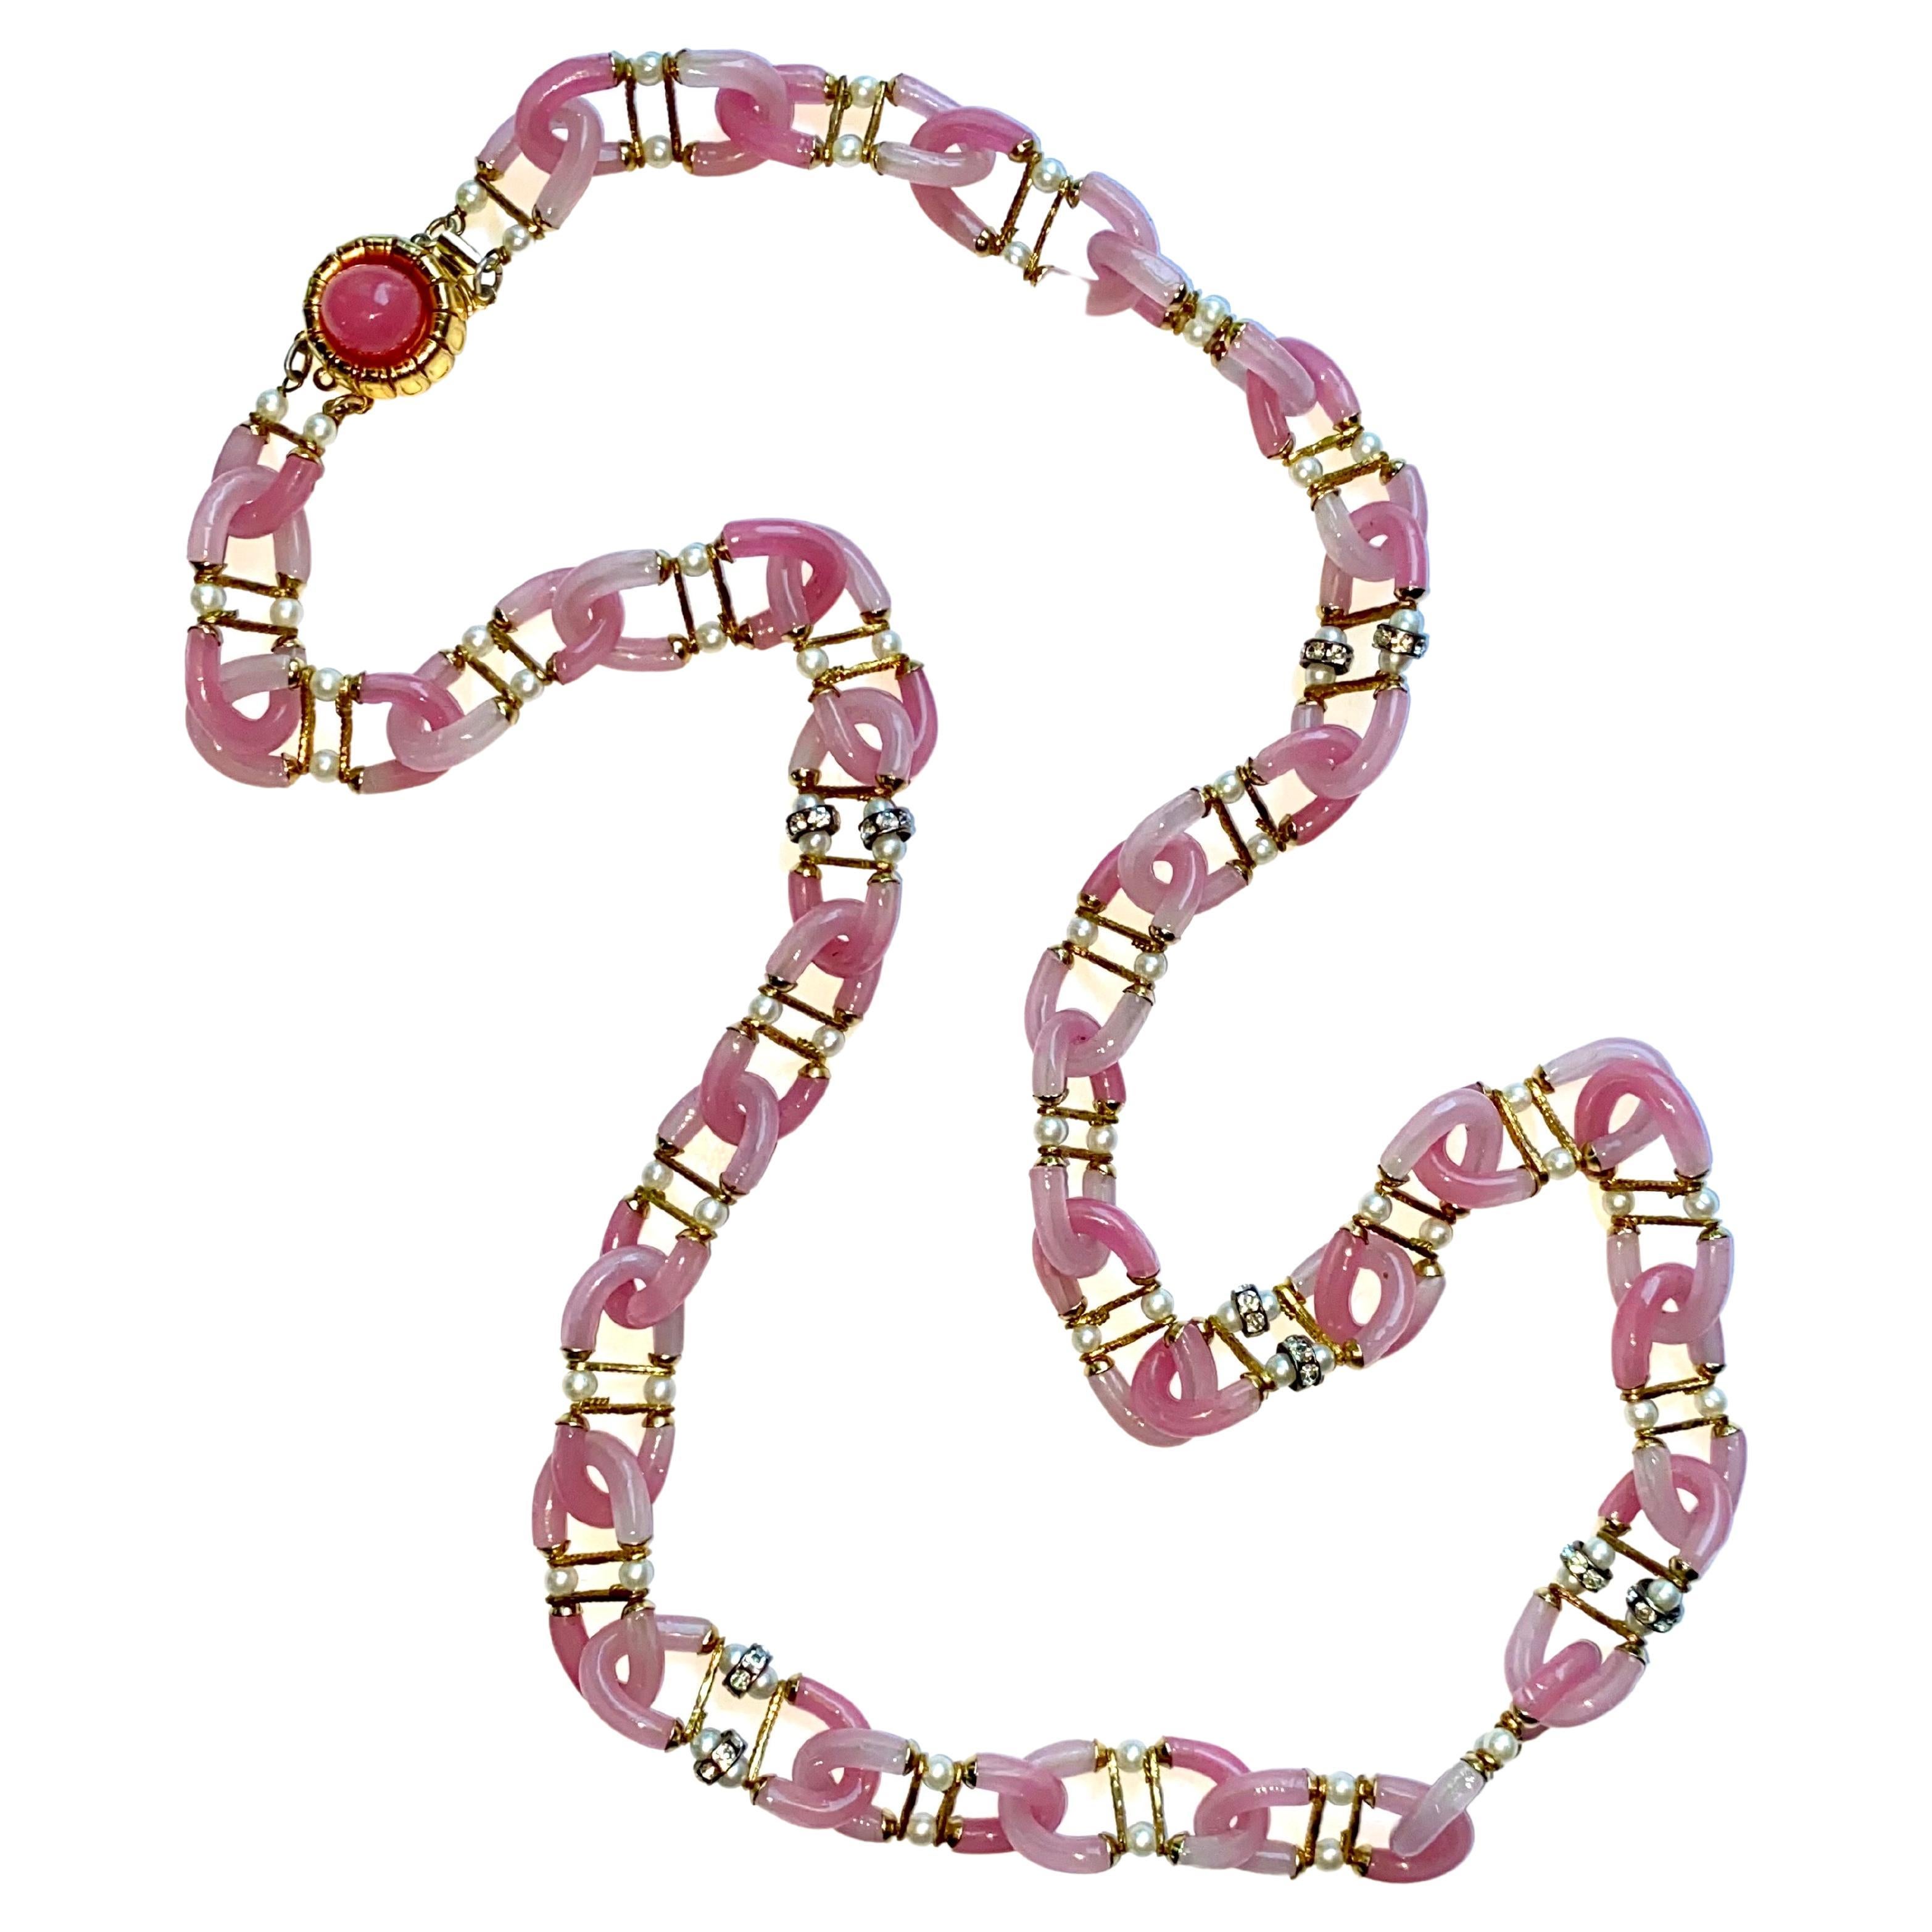 Archimede Seguso, Vetri d'Arte, for Chanel Rose Pink Glass Chain Necklace, 1960s